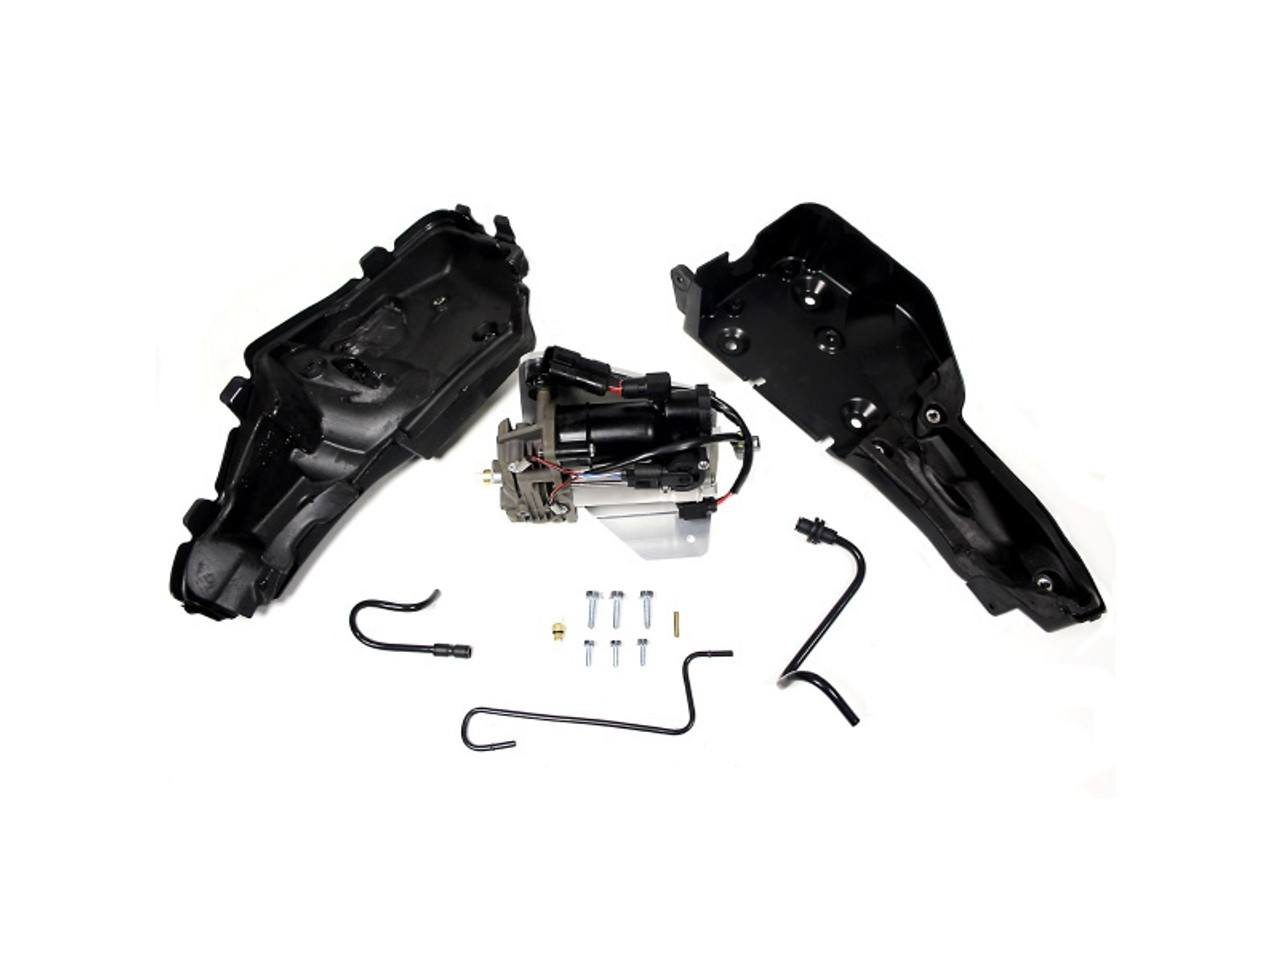 Allmakes 4x4 Branded AMK Style for Discovery 3, 4 and Range Rover Sport Compressor Kit - LR072537